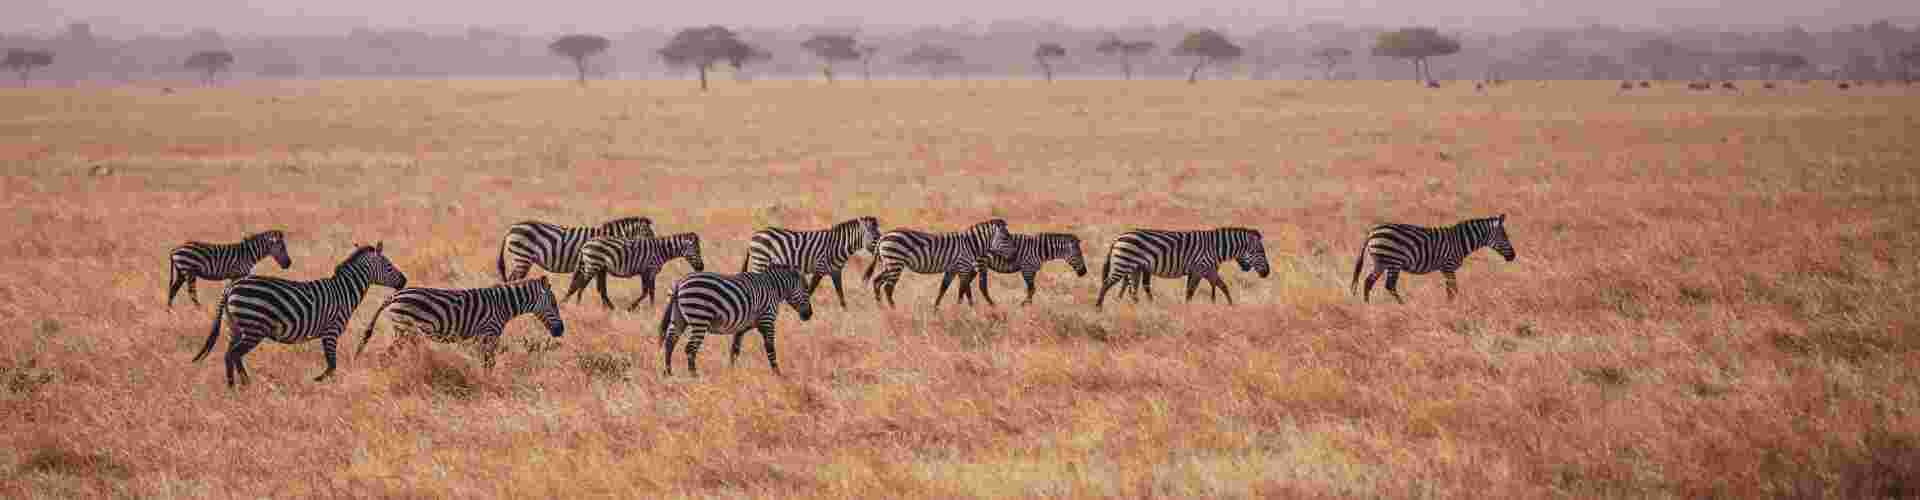 A herd of zebra walking along the grassy plains of the Serengeti in Tanzania 